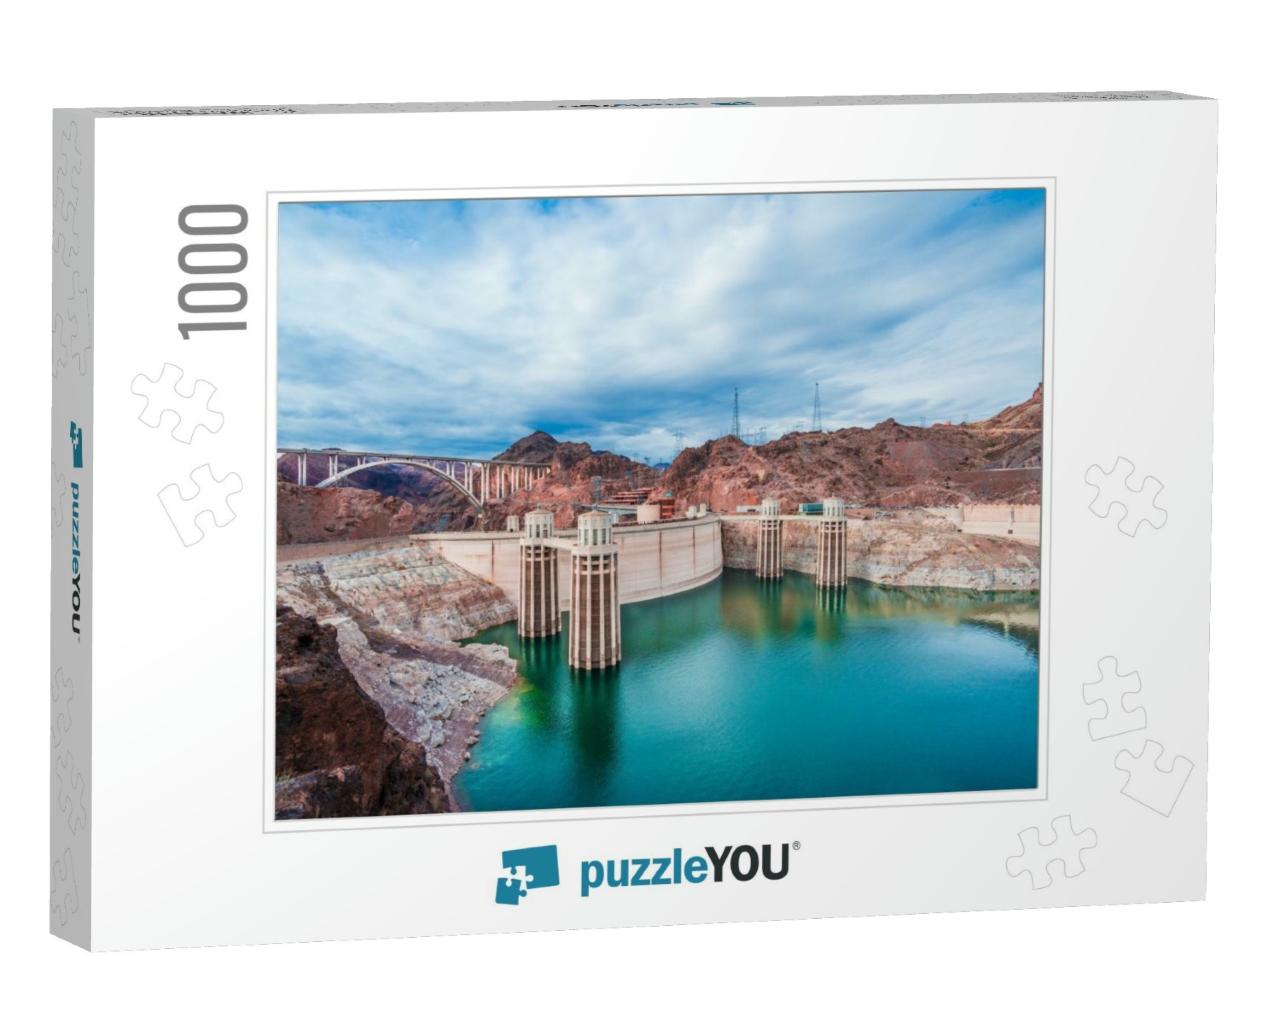 View of the Hoover Dam in Nevada, Usa... Jigsaw Puzzle with 1000 pieces